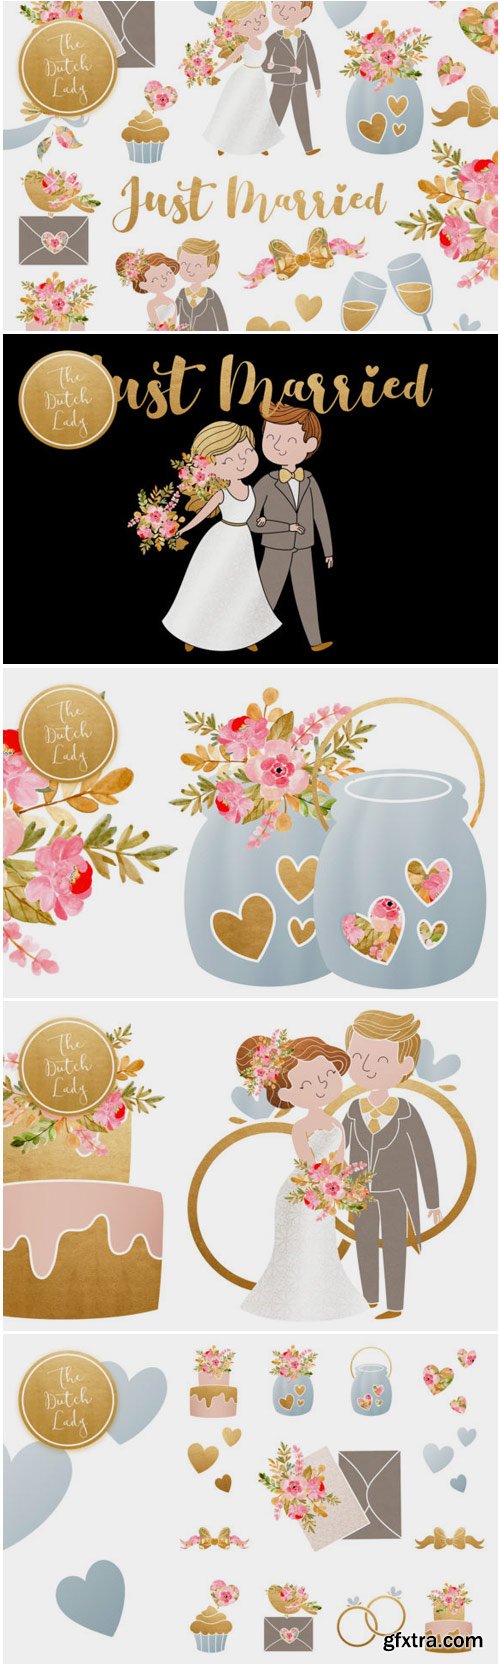 Wedding Day & Marriage Clipart Set 1561876